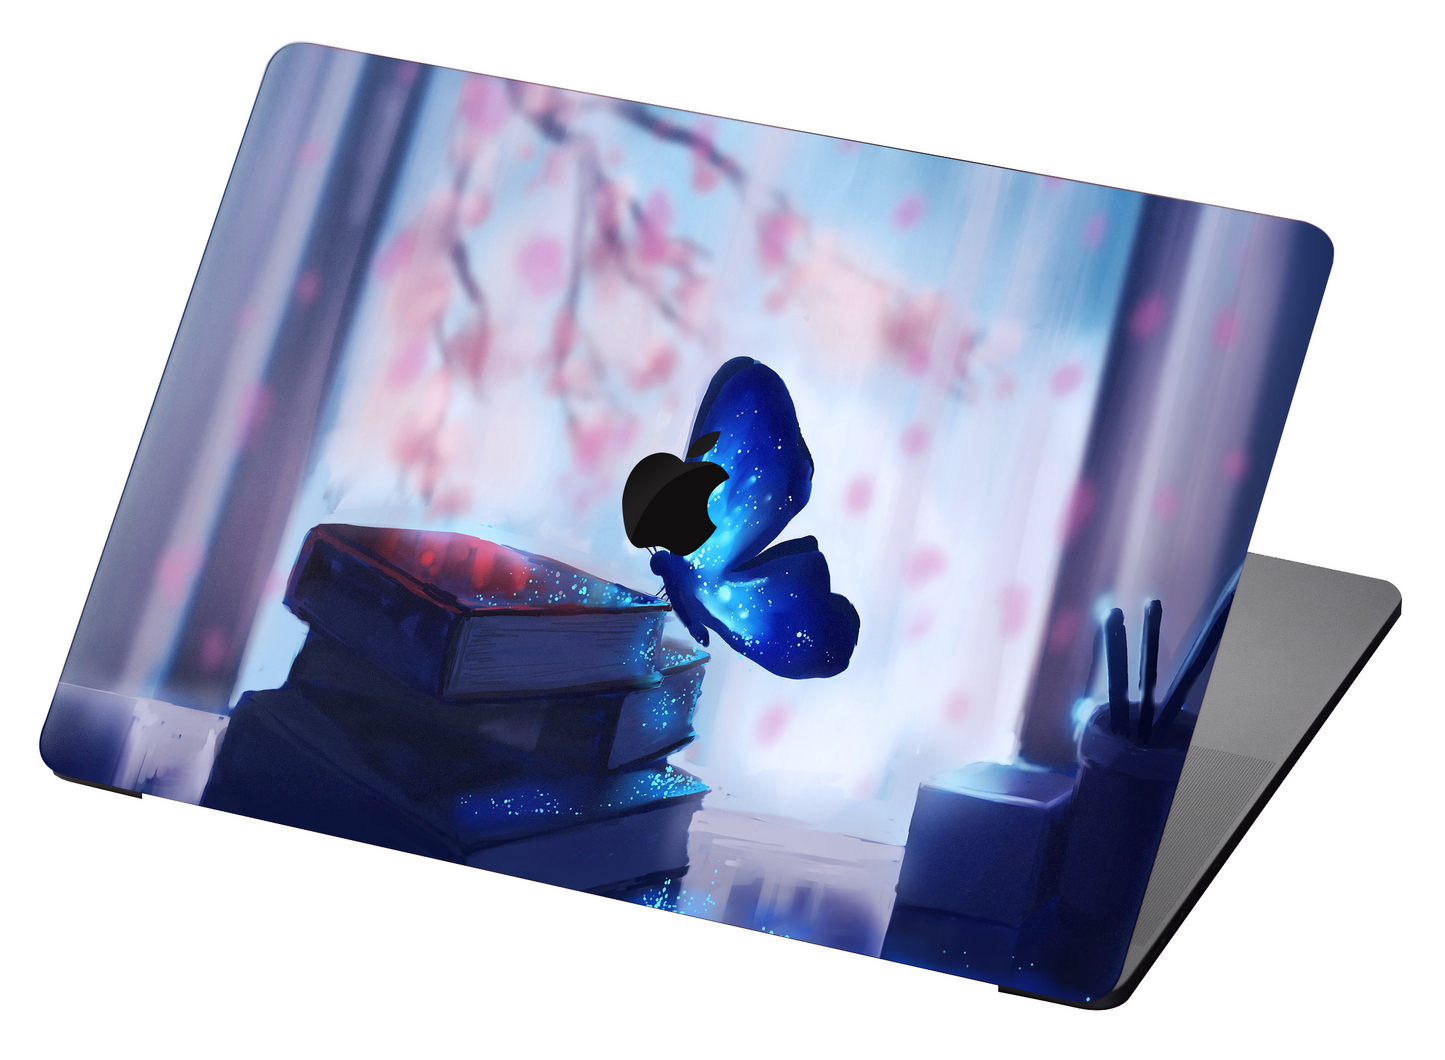 Butterfly On A Book MacBook